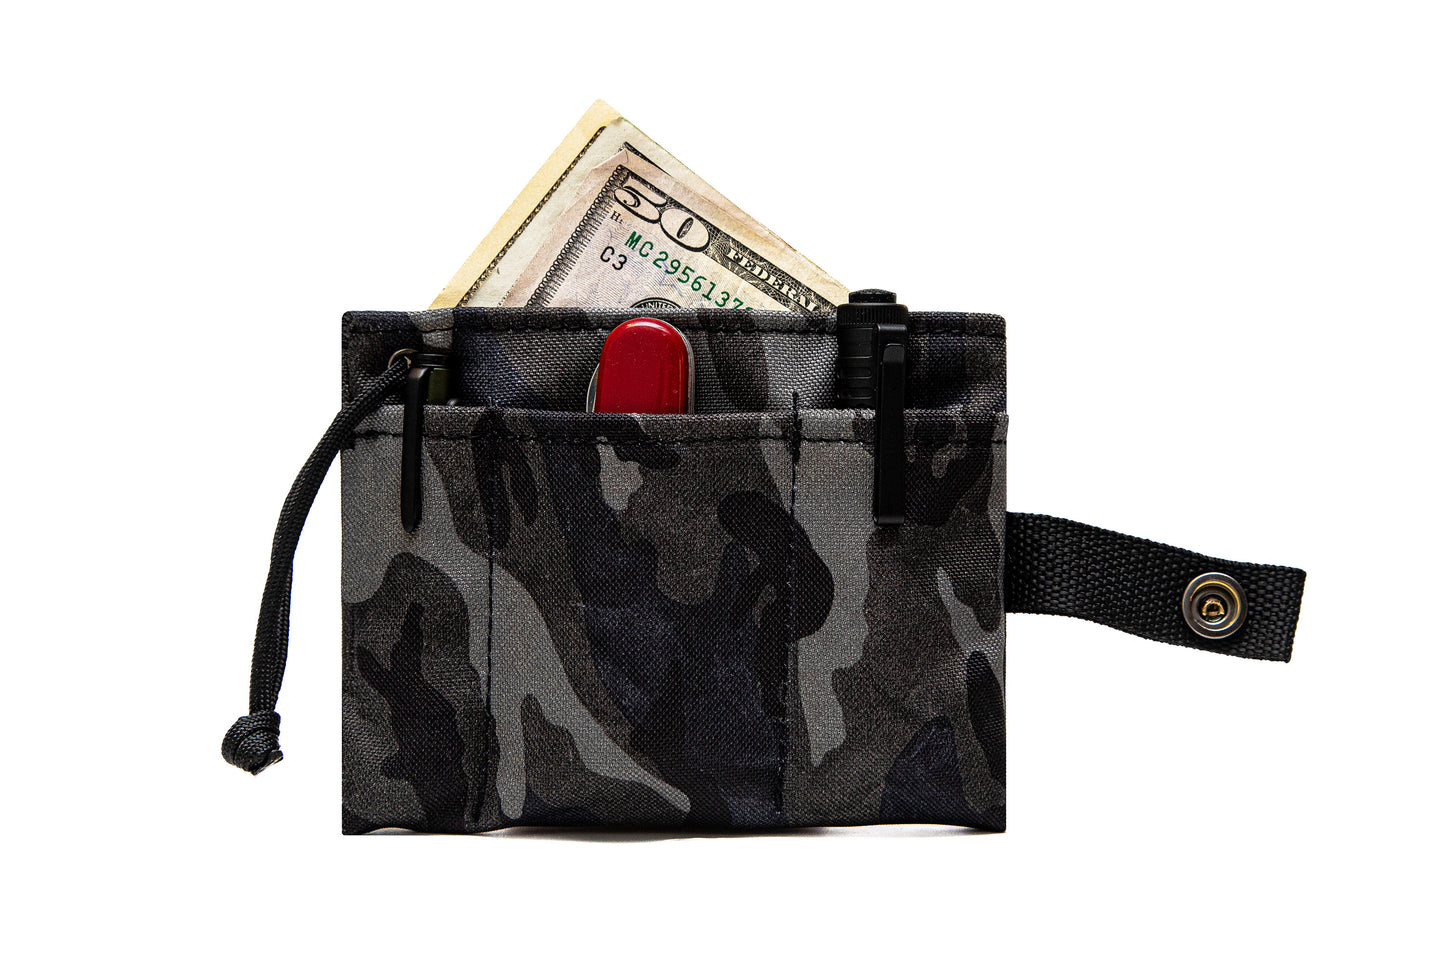 Outdoor Gear Organizer: Durable Camo Cordura Pocket Roll-Up Pouch with Multiple Pockets and Metal Snap Closure